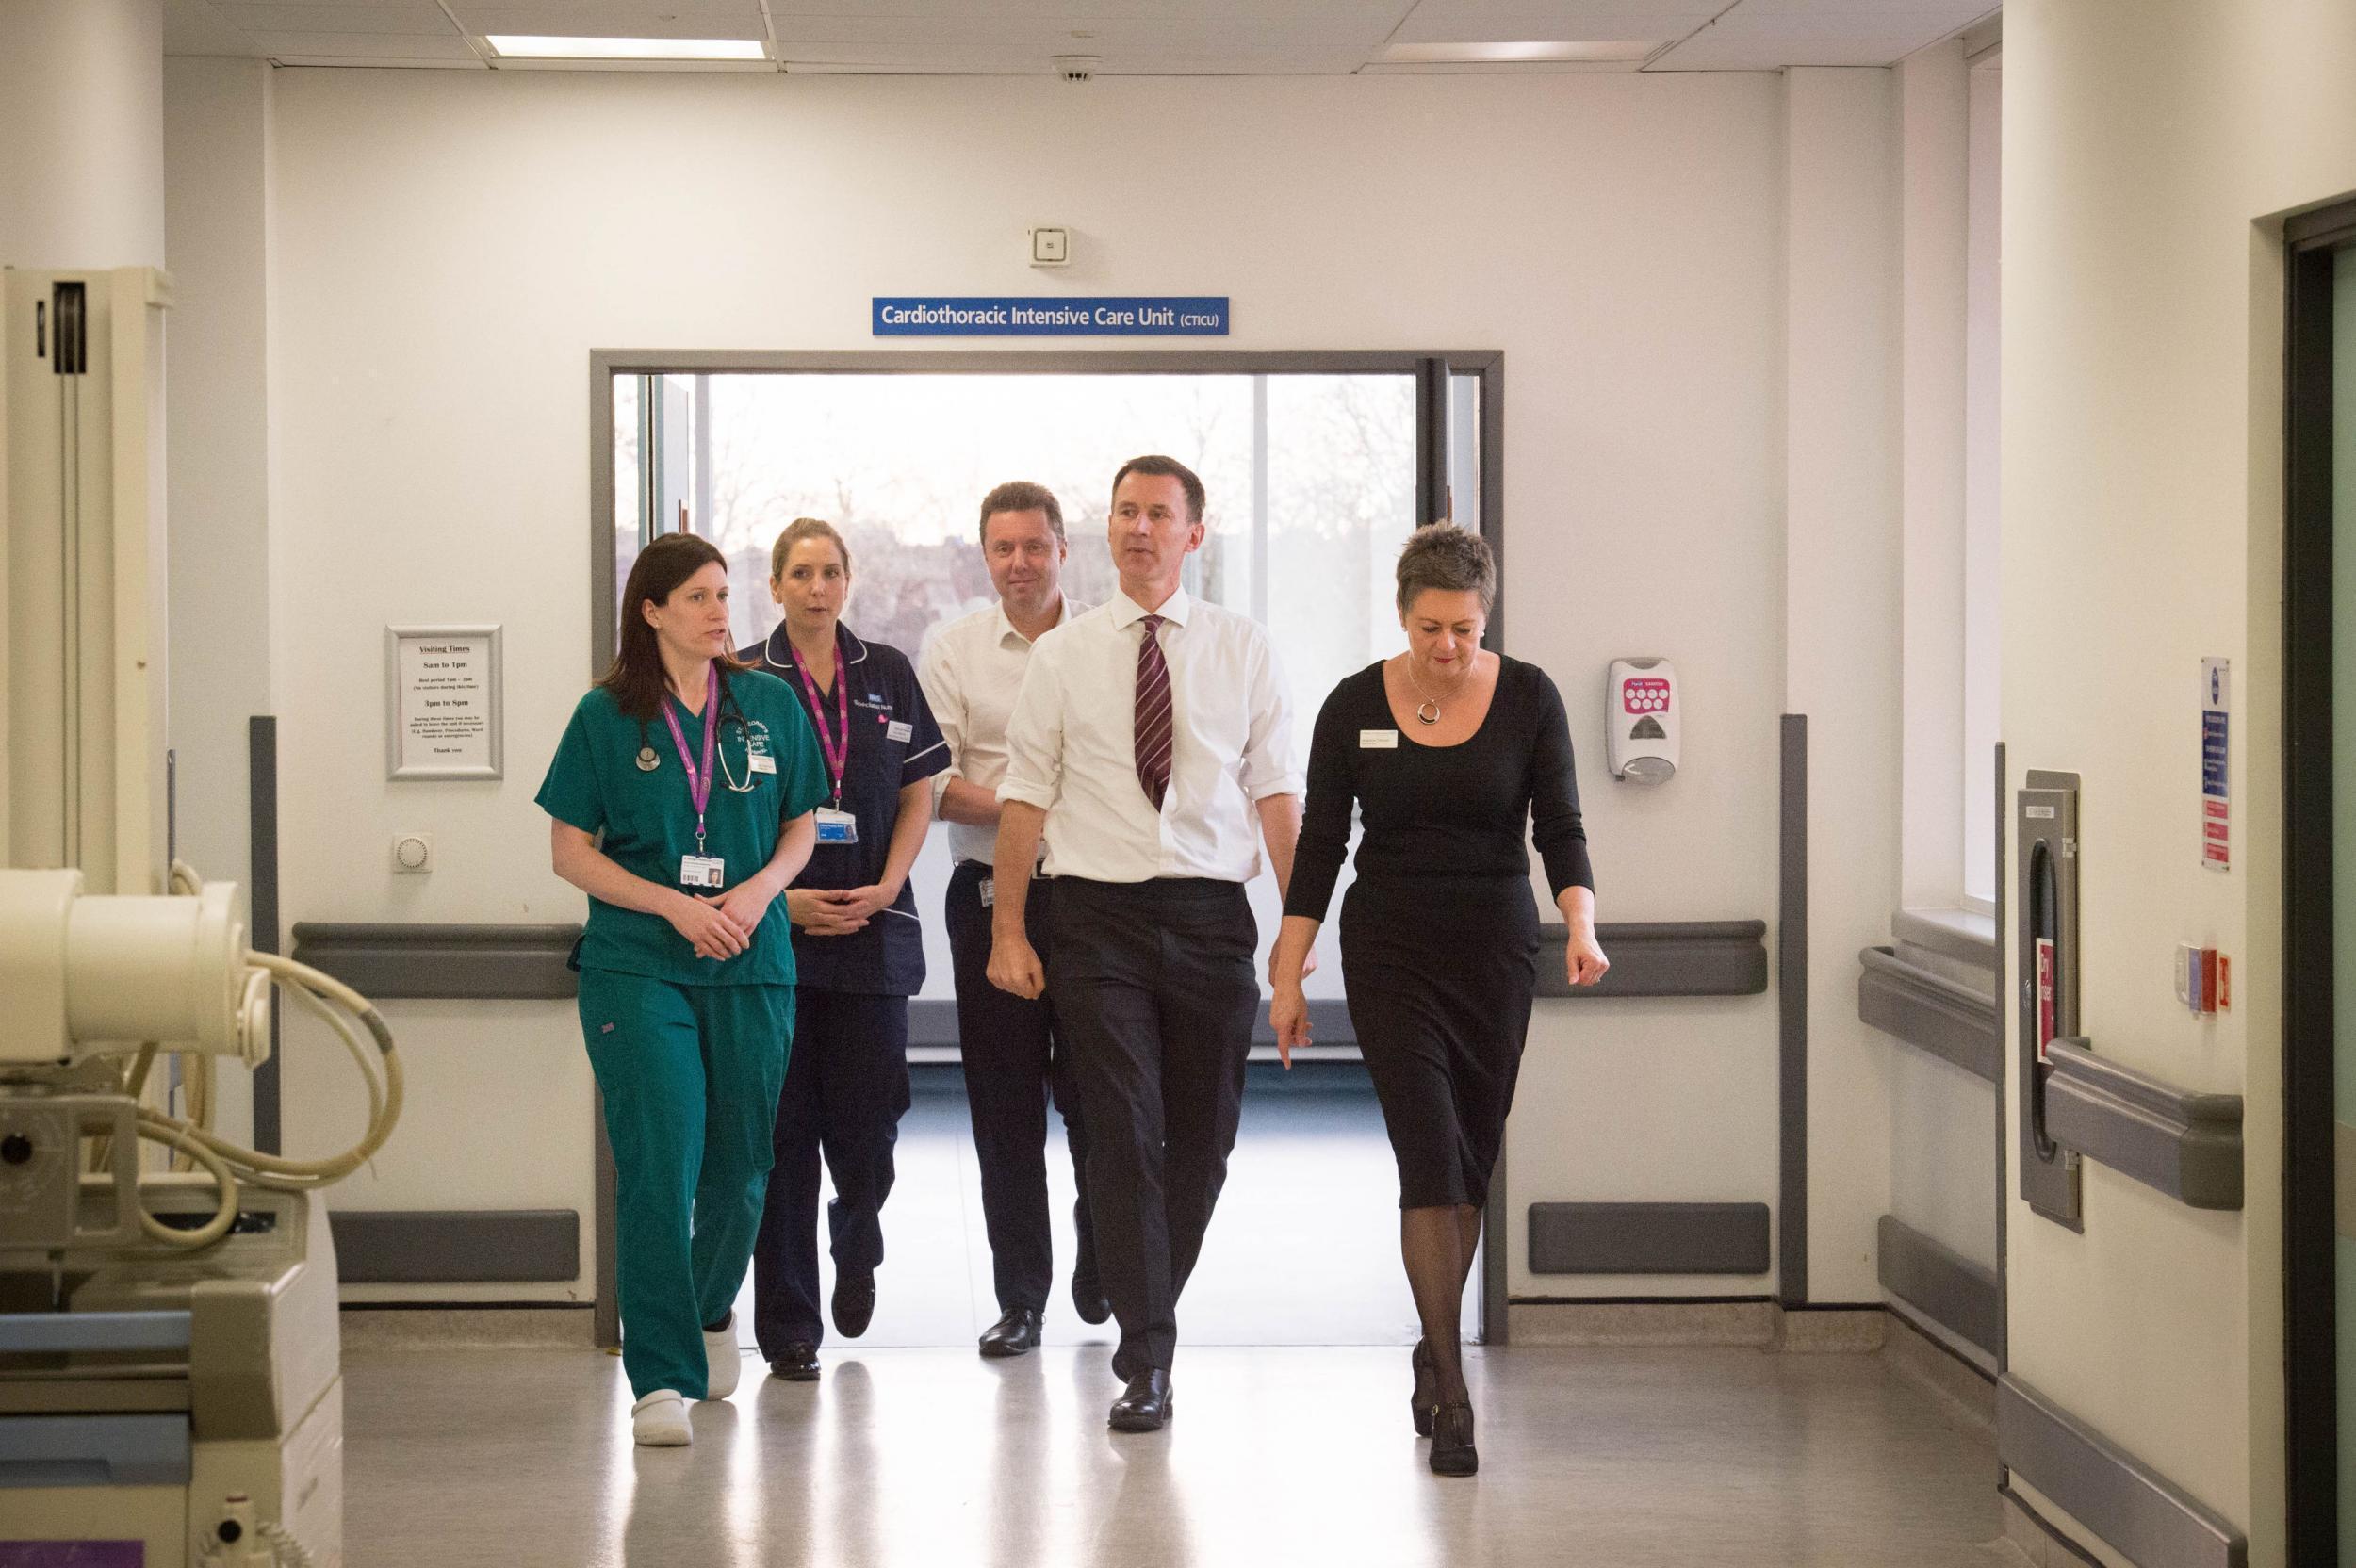 The bed occupancy rate in the NHS is regularly above its ‘safe occupancy rate’ of 85 per cent